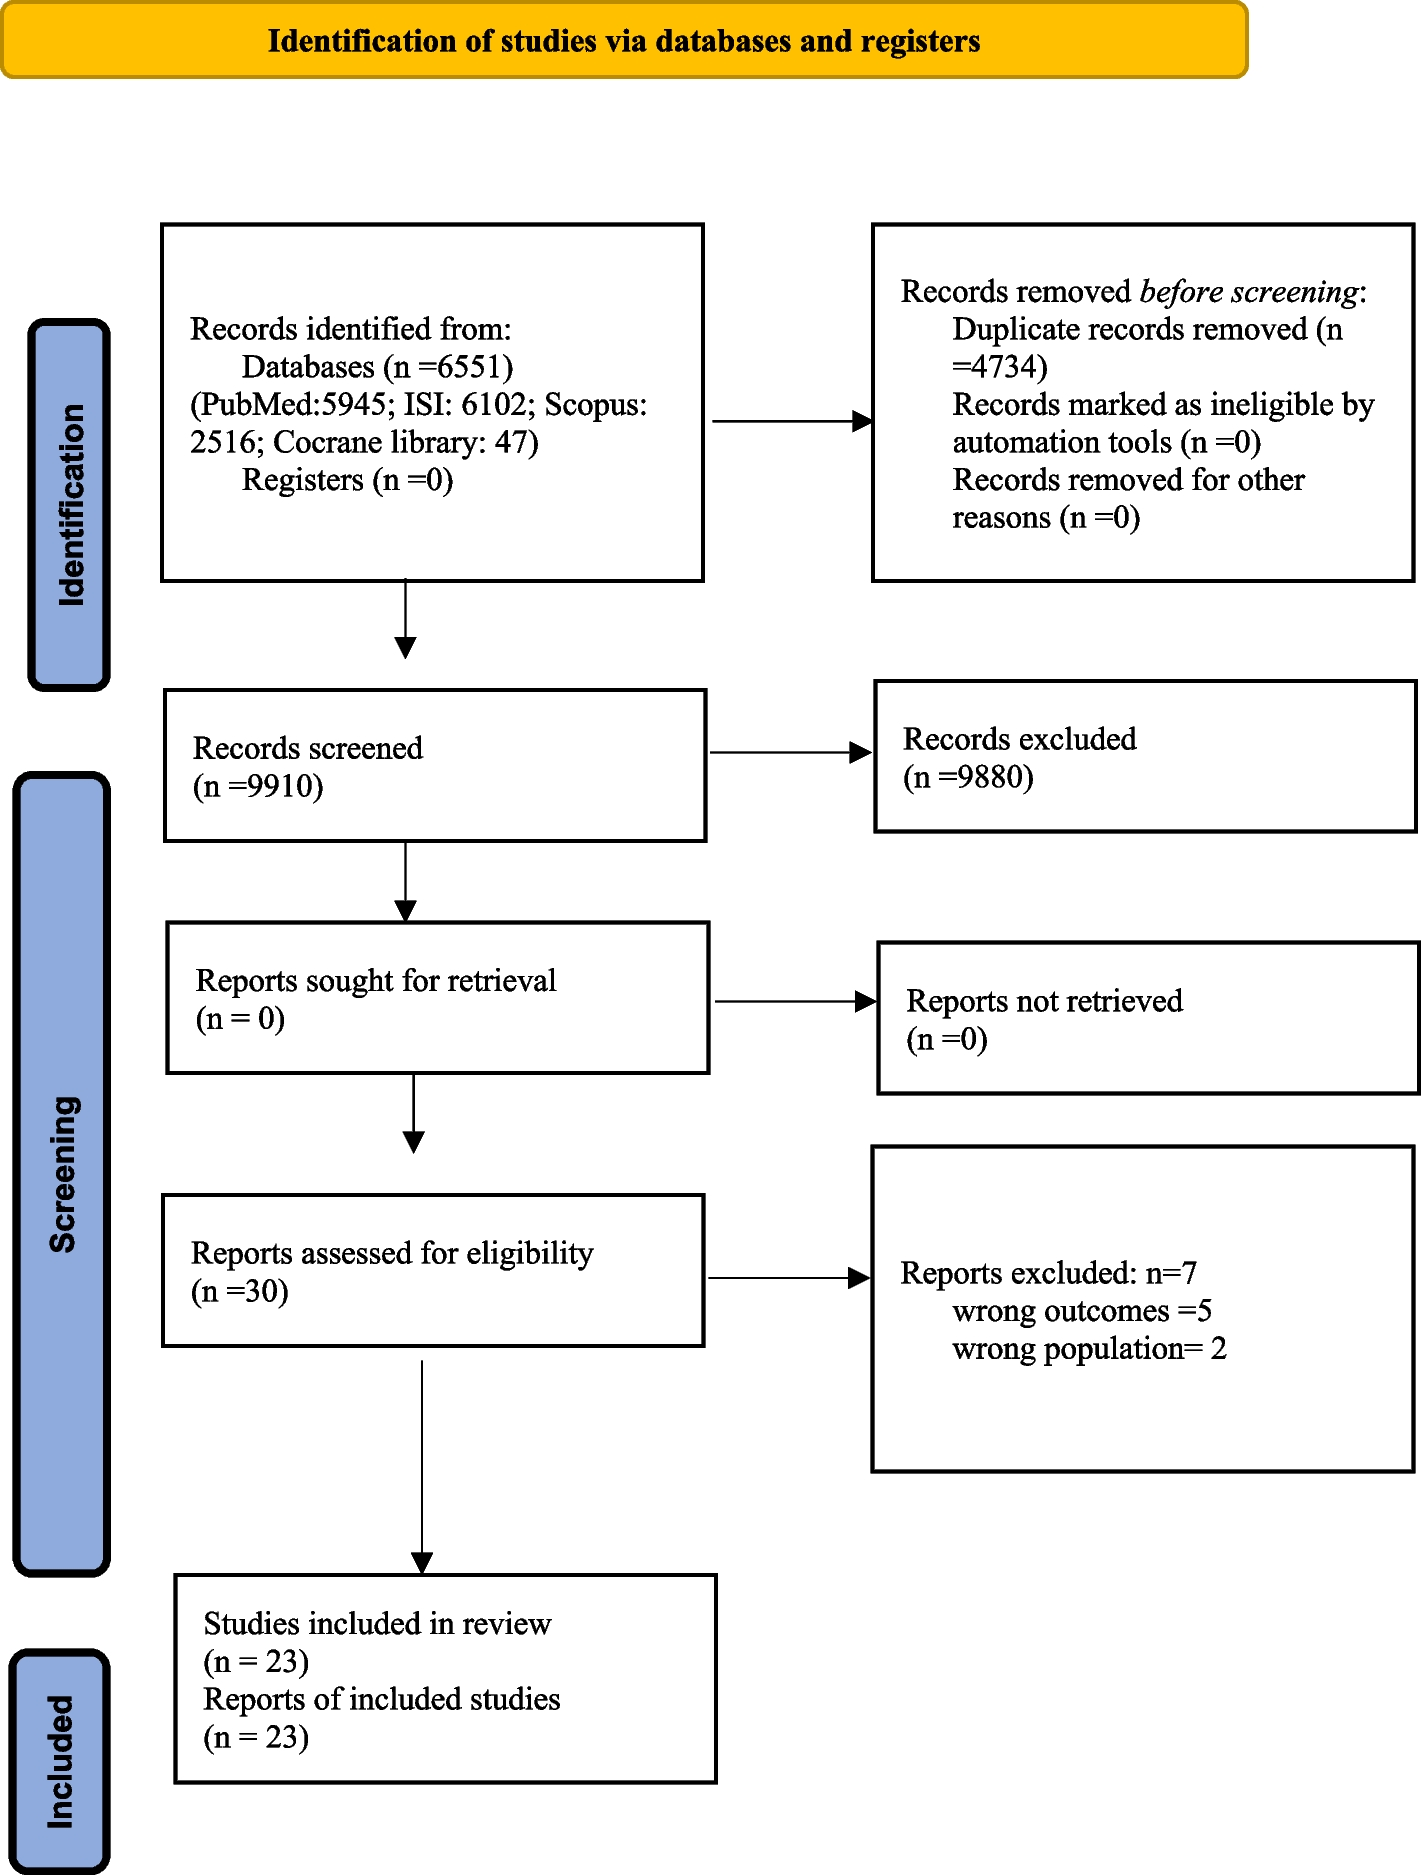 The relationship between hypertensive disorders in pregnancy and endometriosis: a systematic review and meta-analysis